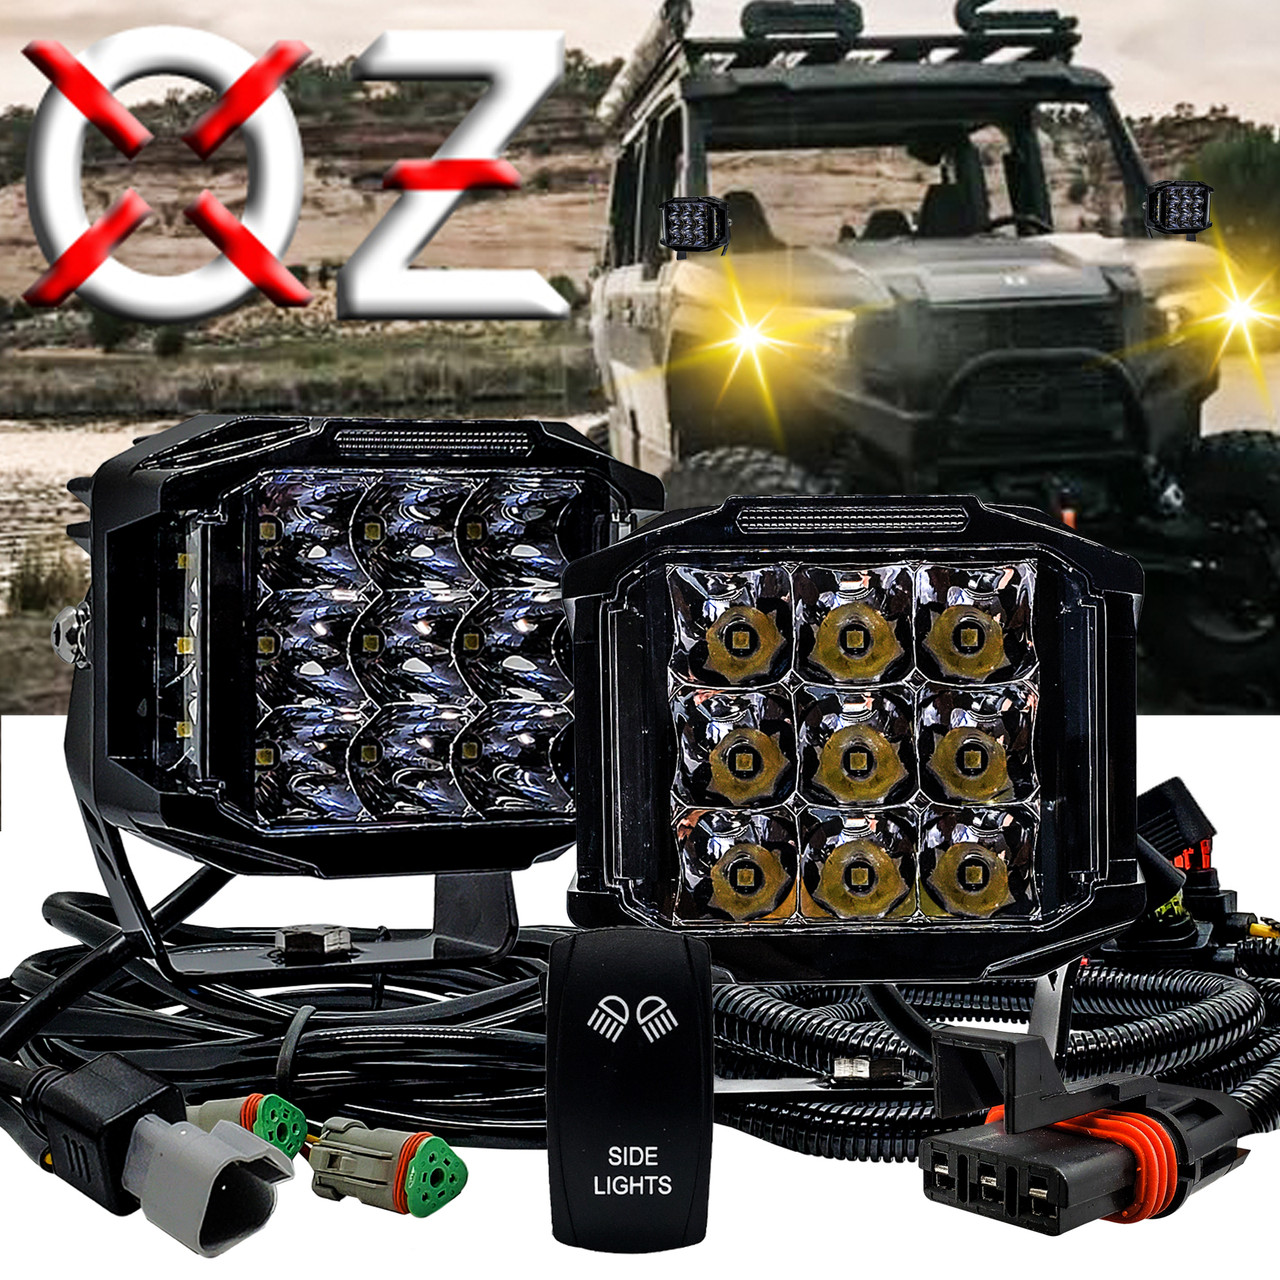 3 POD Side Lights Spot Beam with Power Bus Bar Dual DT Plug Wire Harness  Kit Compatible with Pulse Power Busbar Polaris RZR Turbo Pro XP Ranger Crew